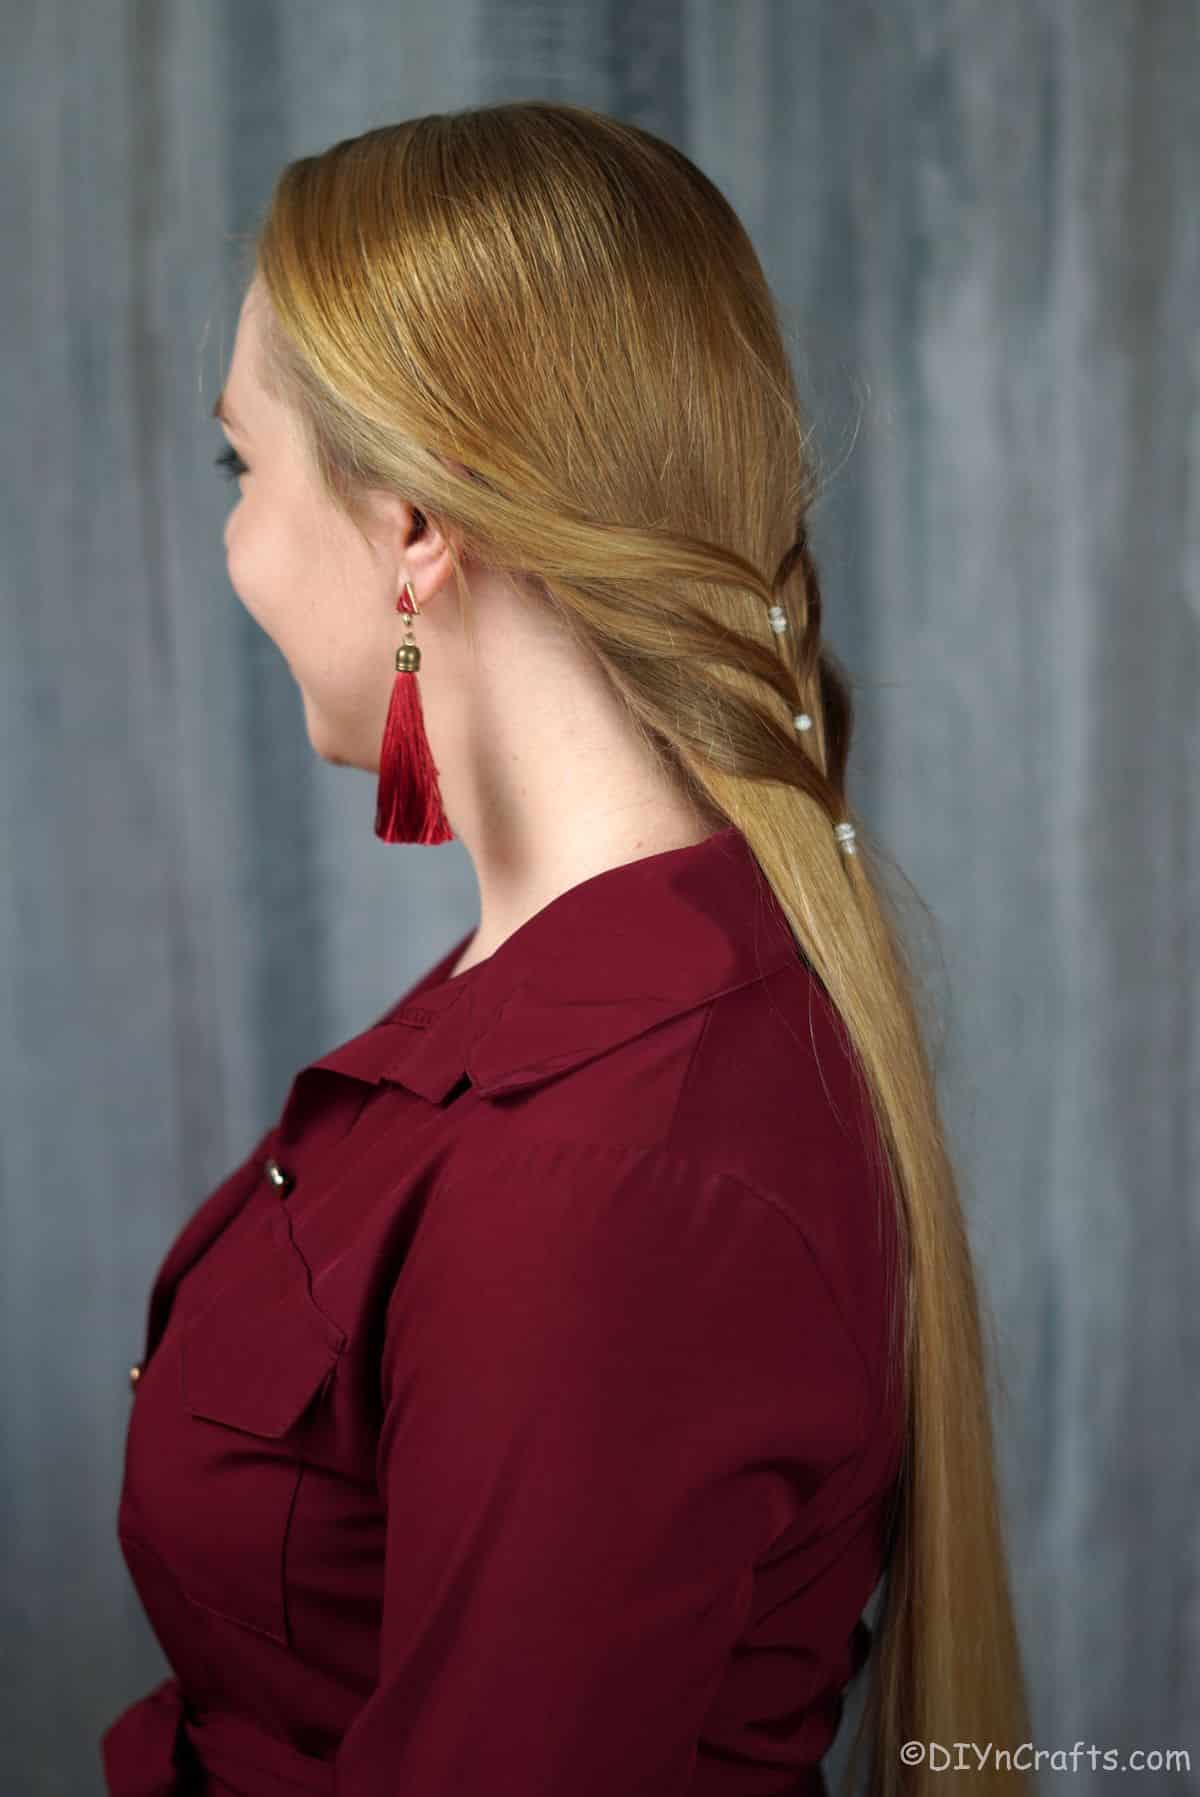 blonde woman in red shirt with low ponytail